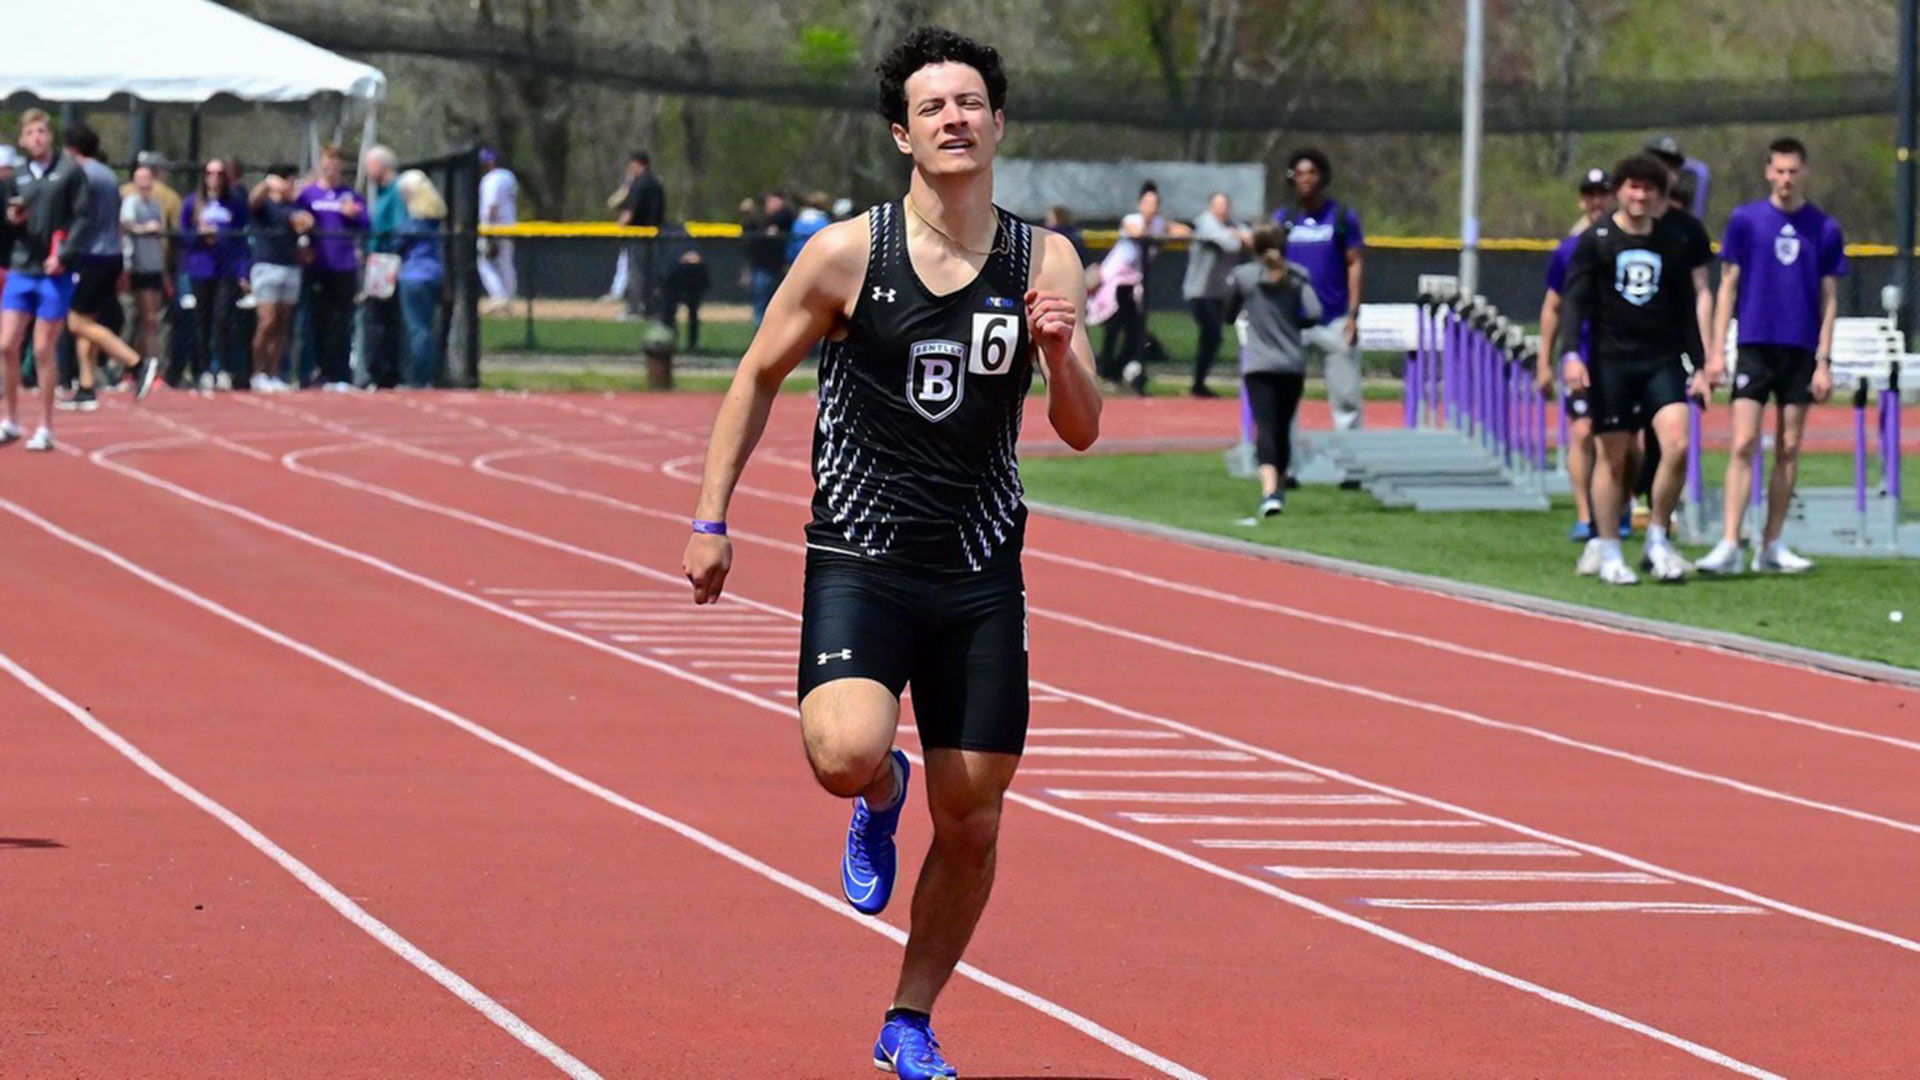 Hurdlers, Distance Runners Impress for Falcons on Final Day of NE10 Championships